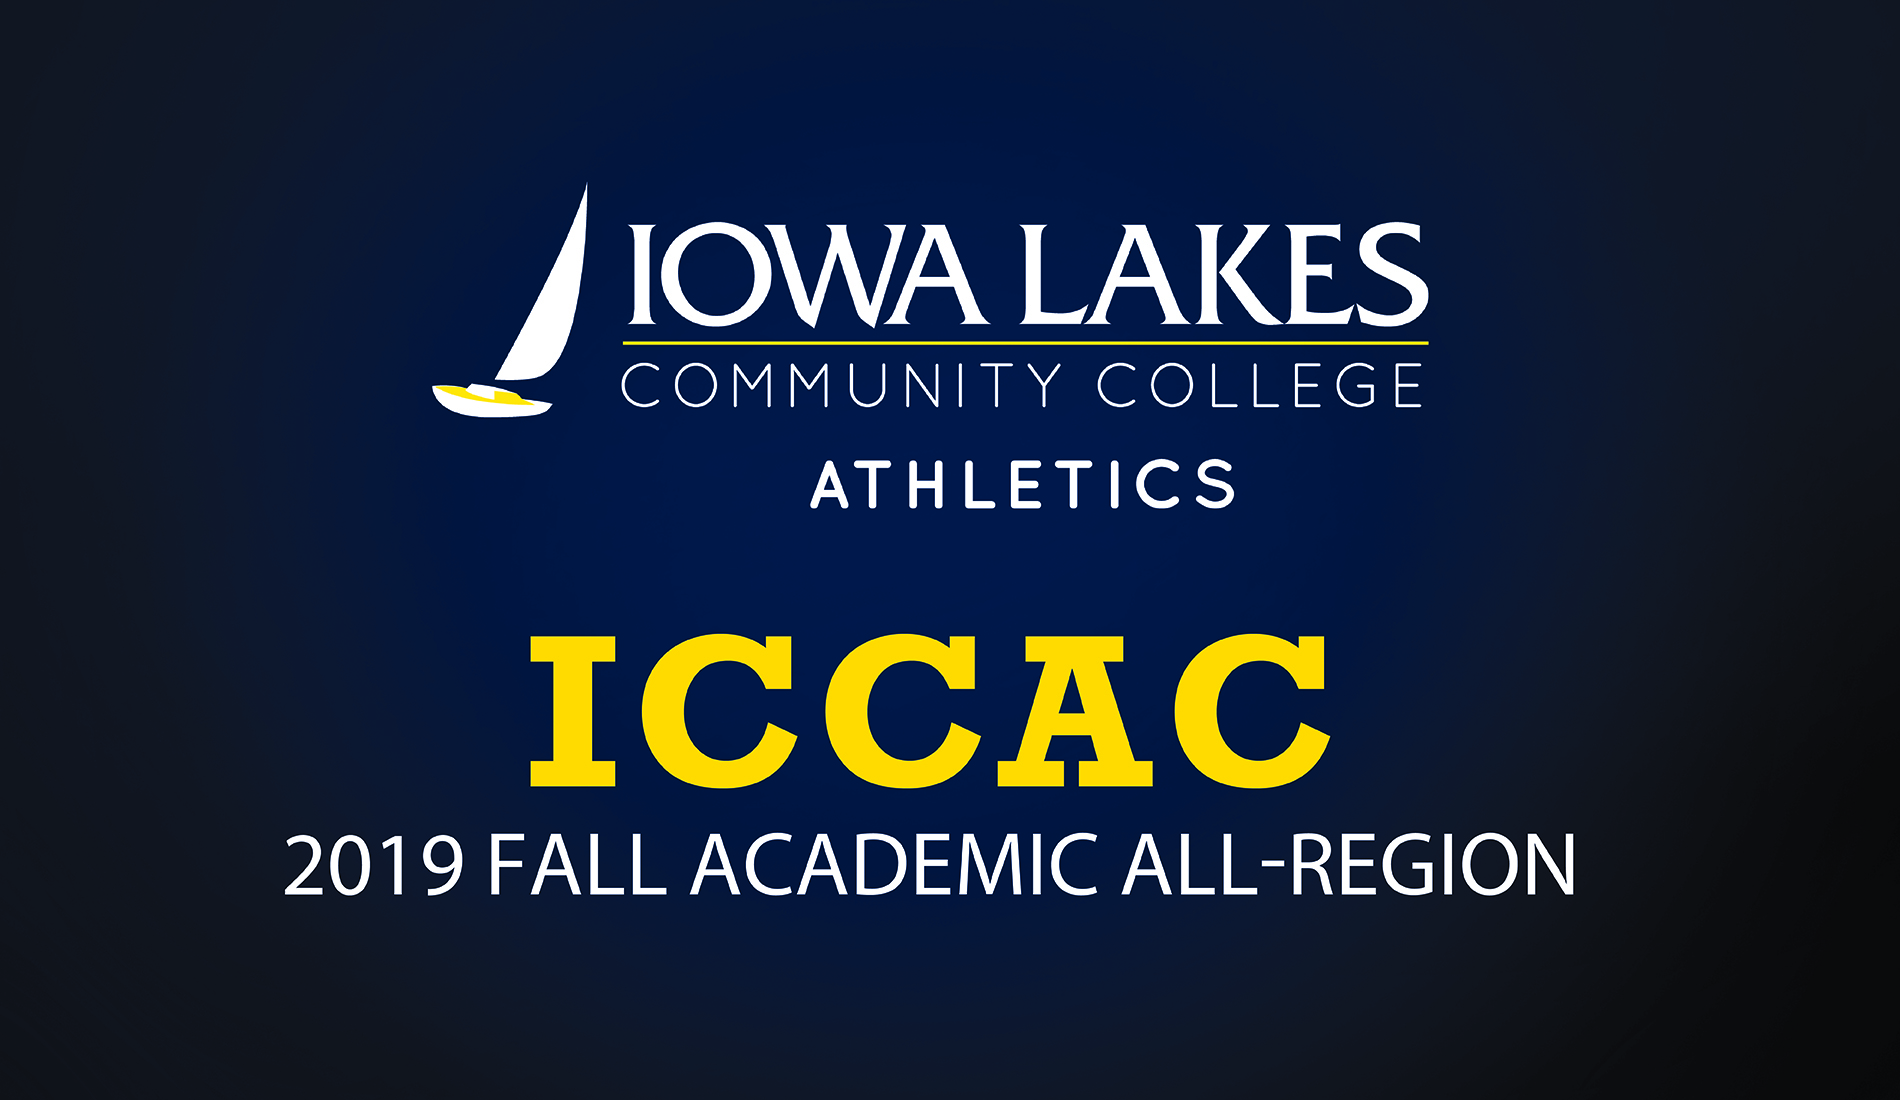 Iowa Lakes Athletes Honored for Academic Success